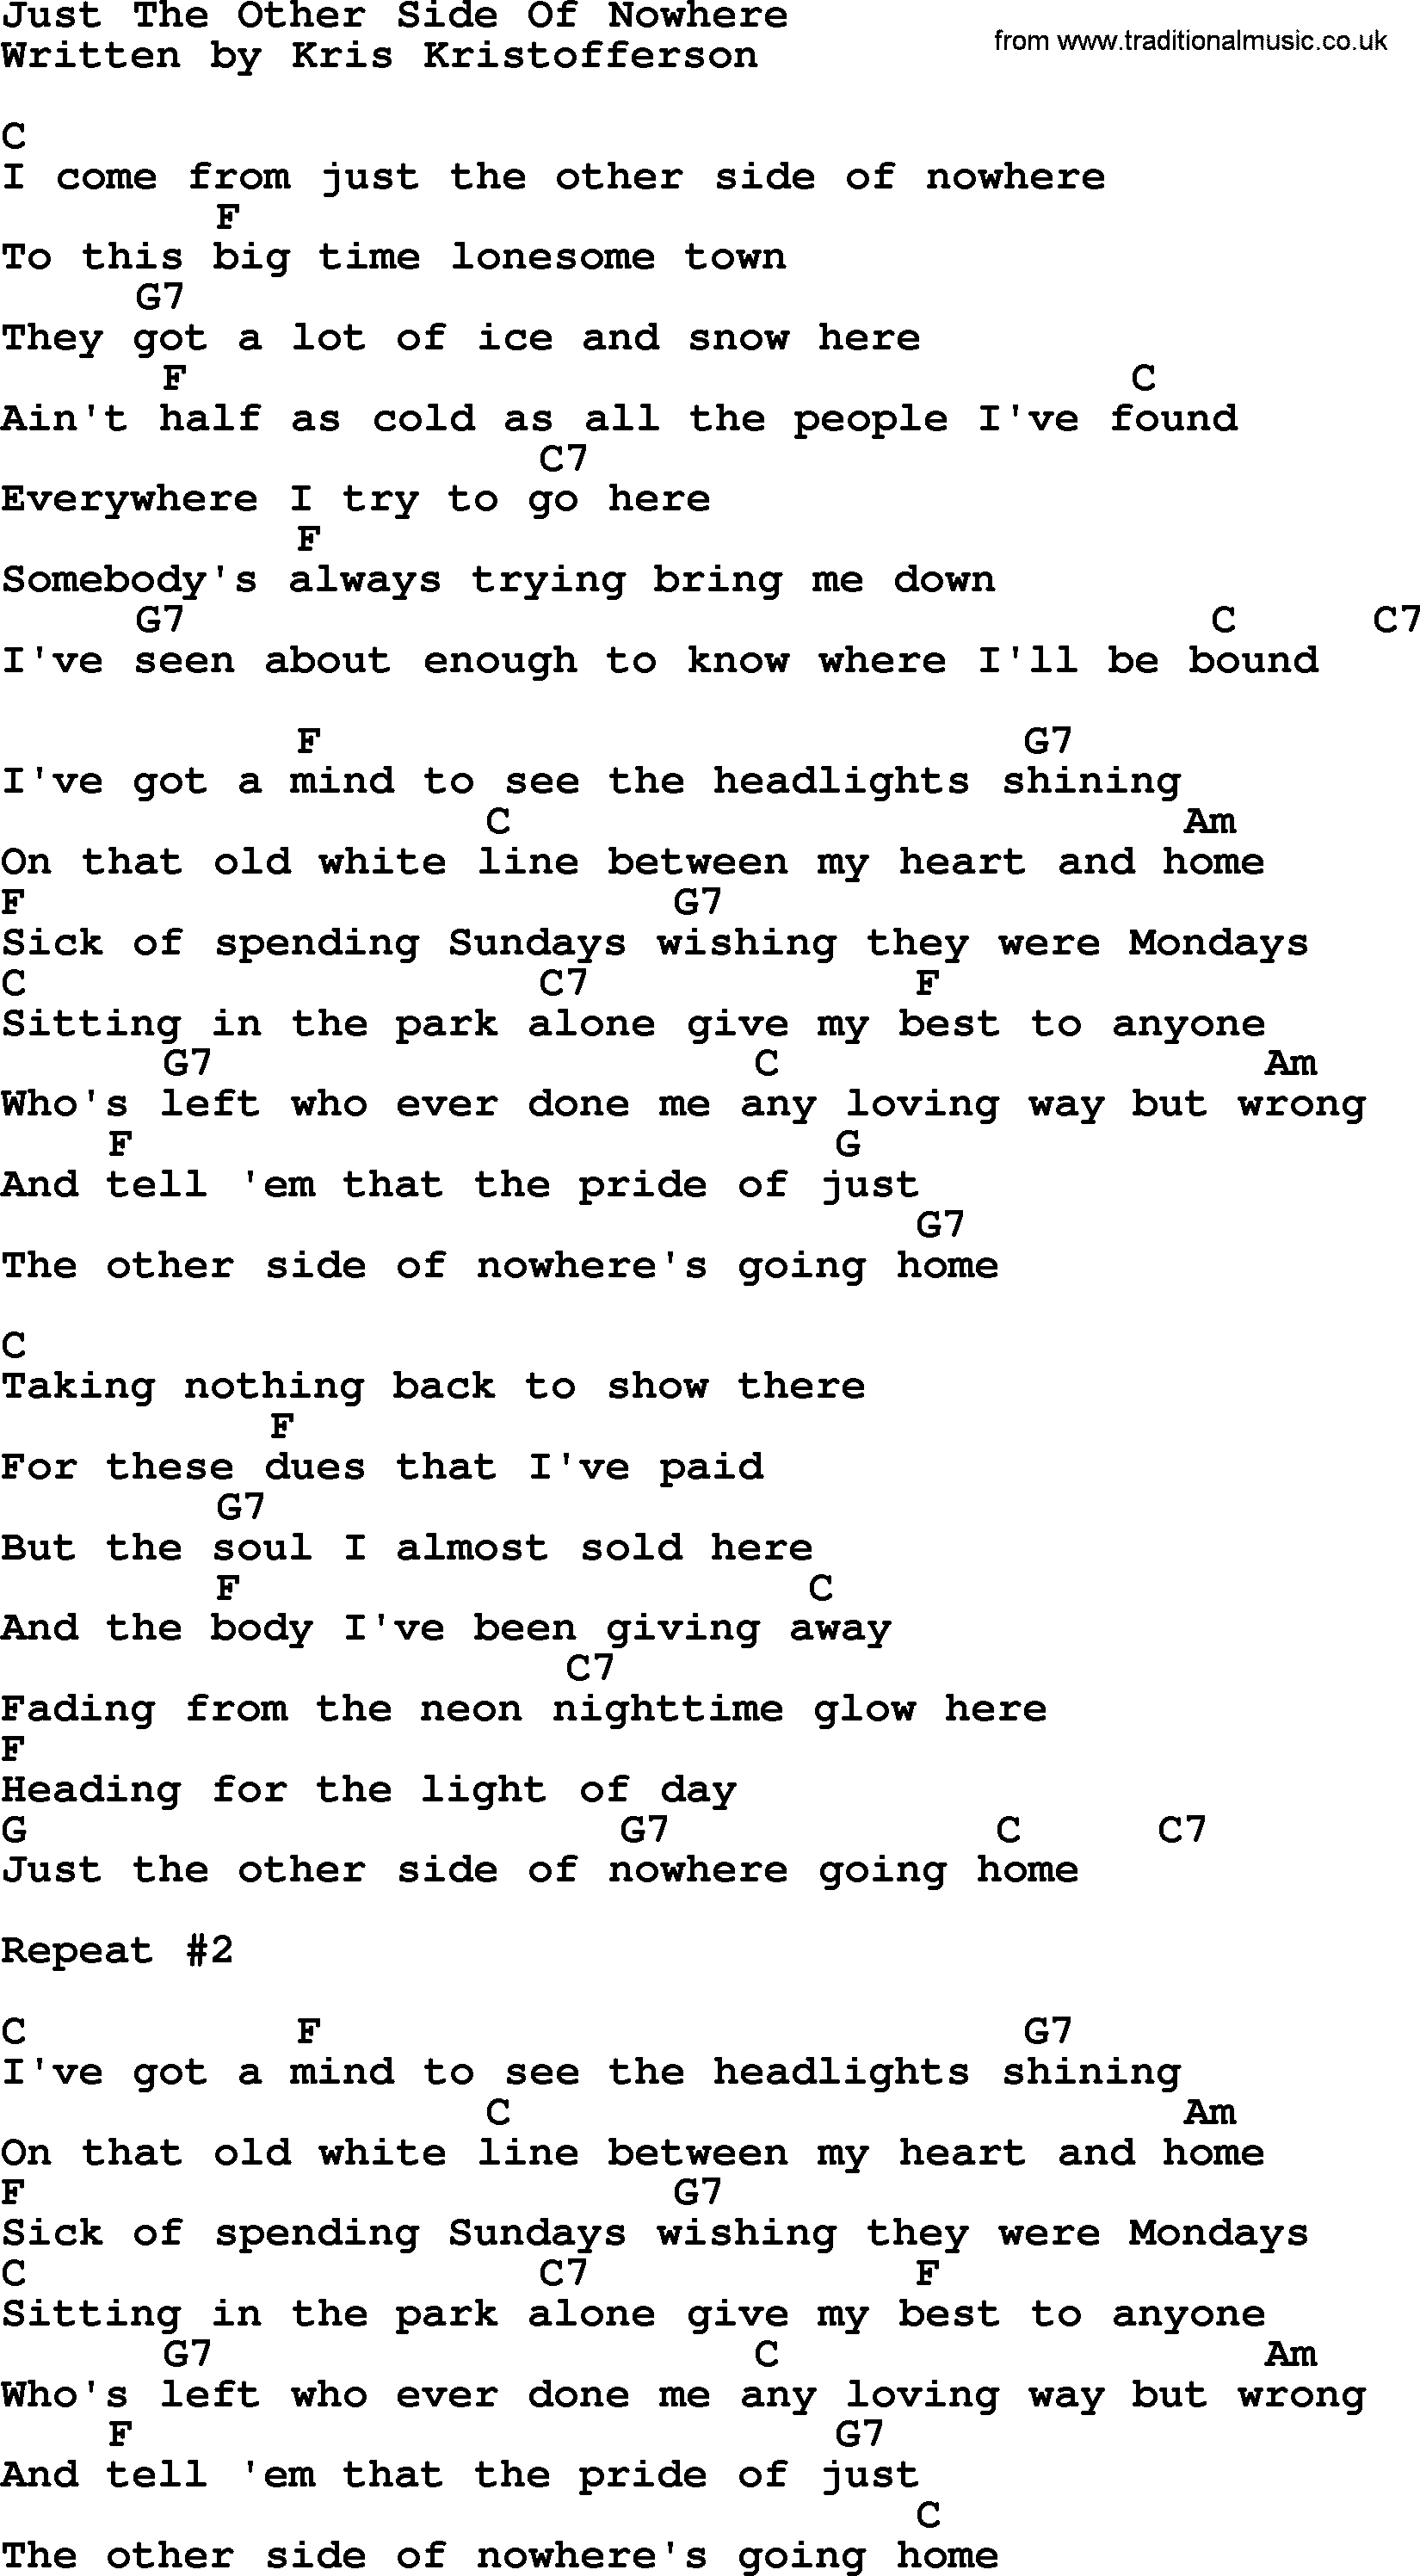 Johnny Cash song Just The Other Side Of Nowhere, lyrics and chords